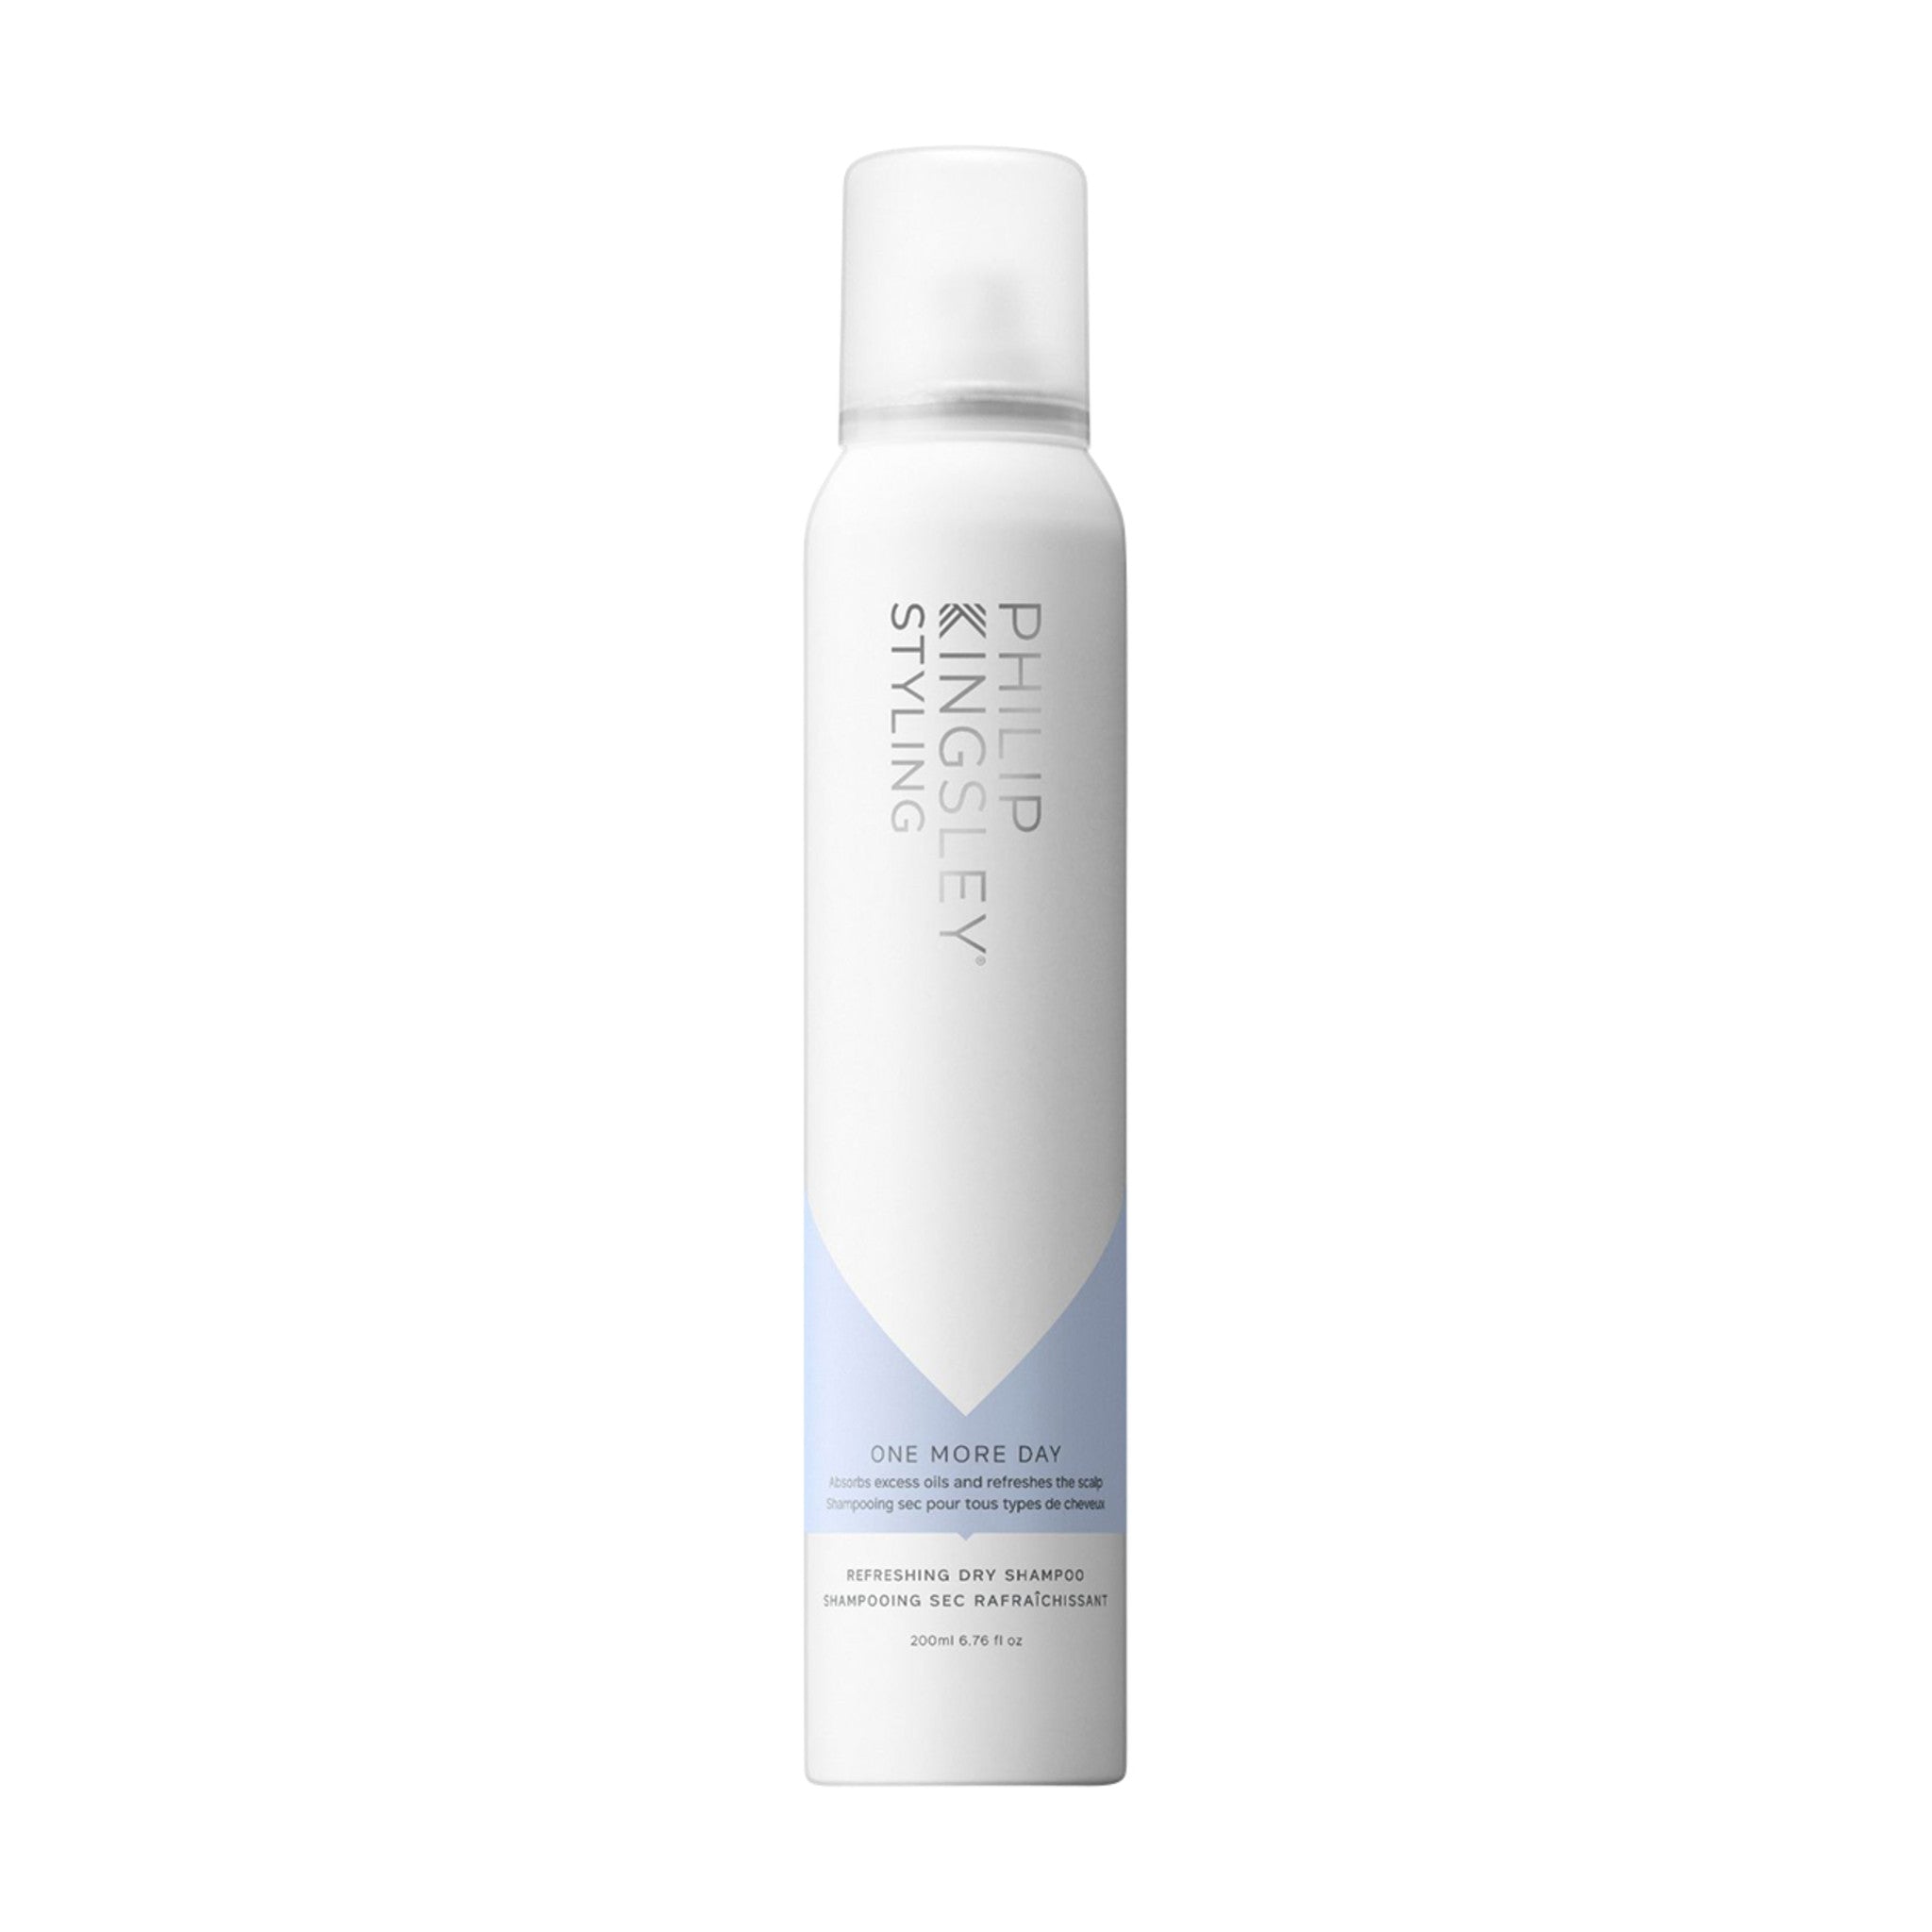 Philip Kingsley One More Day Refreshing Dry Shampoo Size variant: 200ml main image.